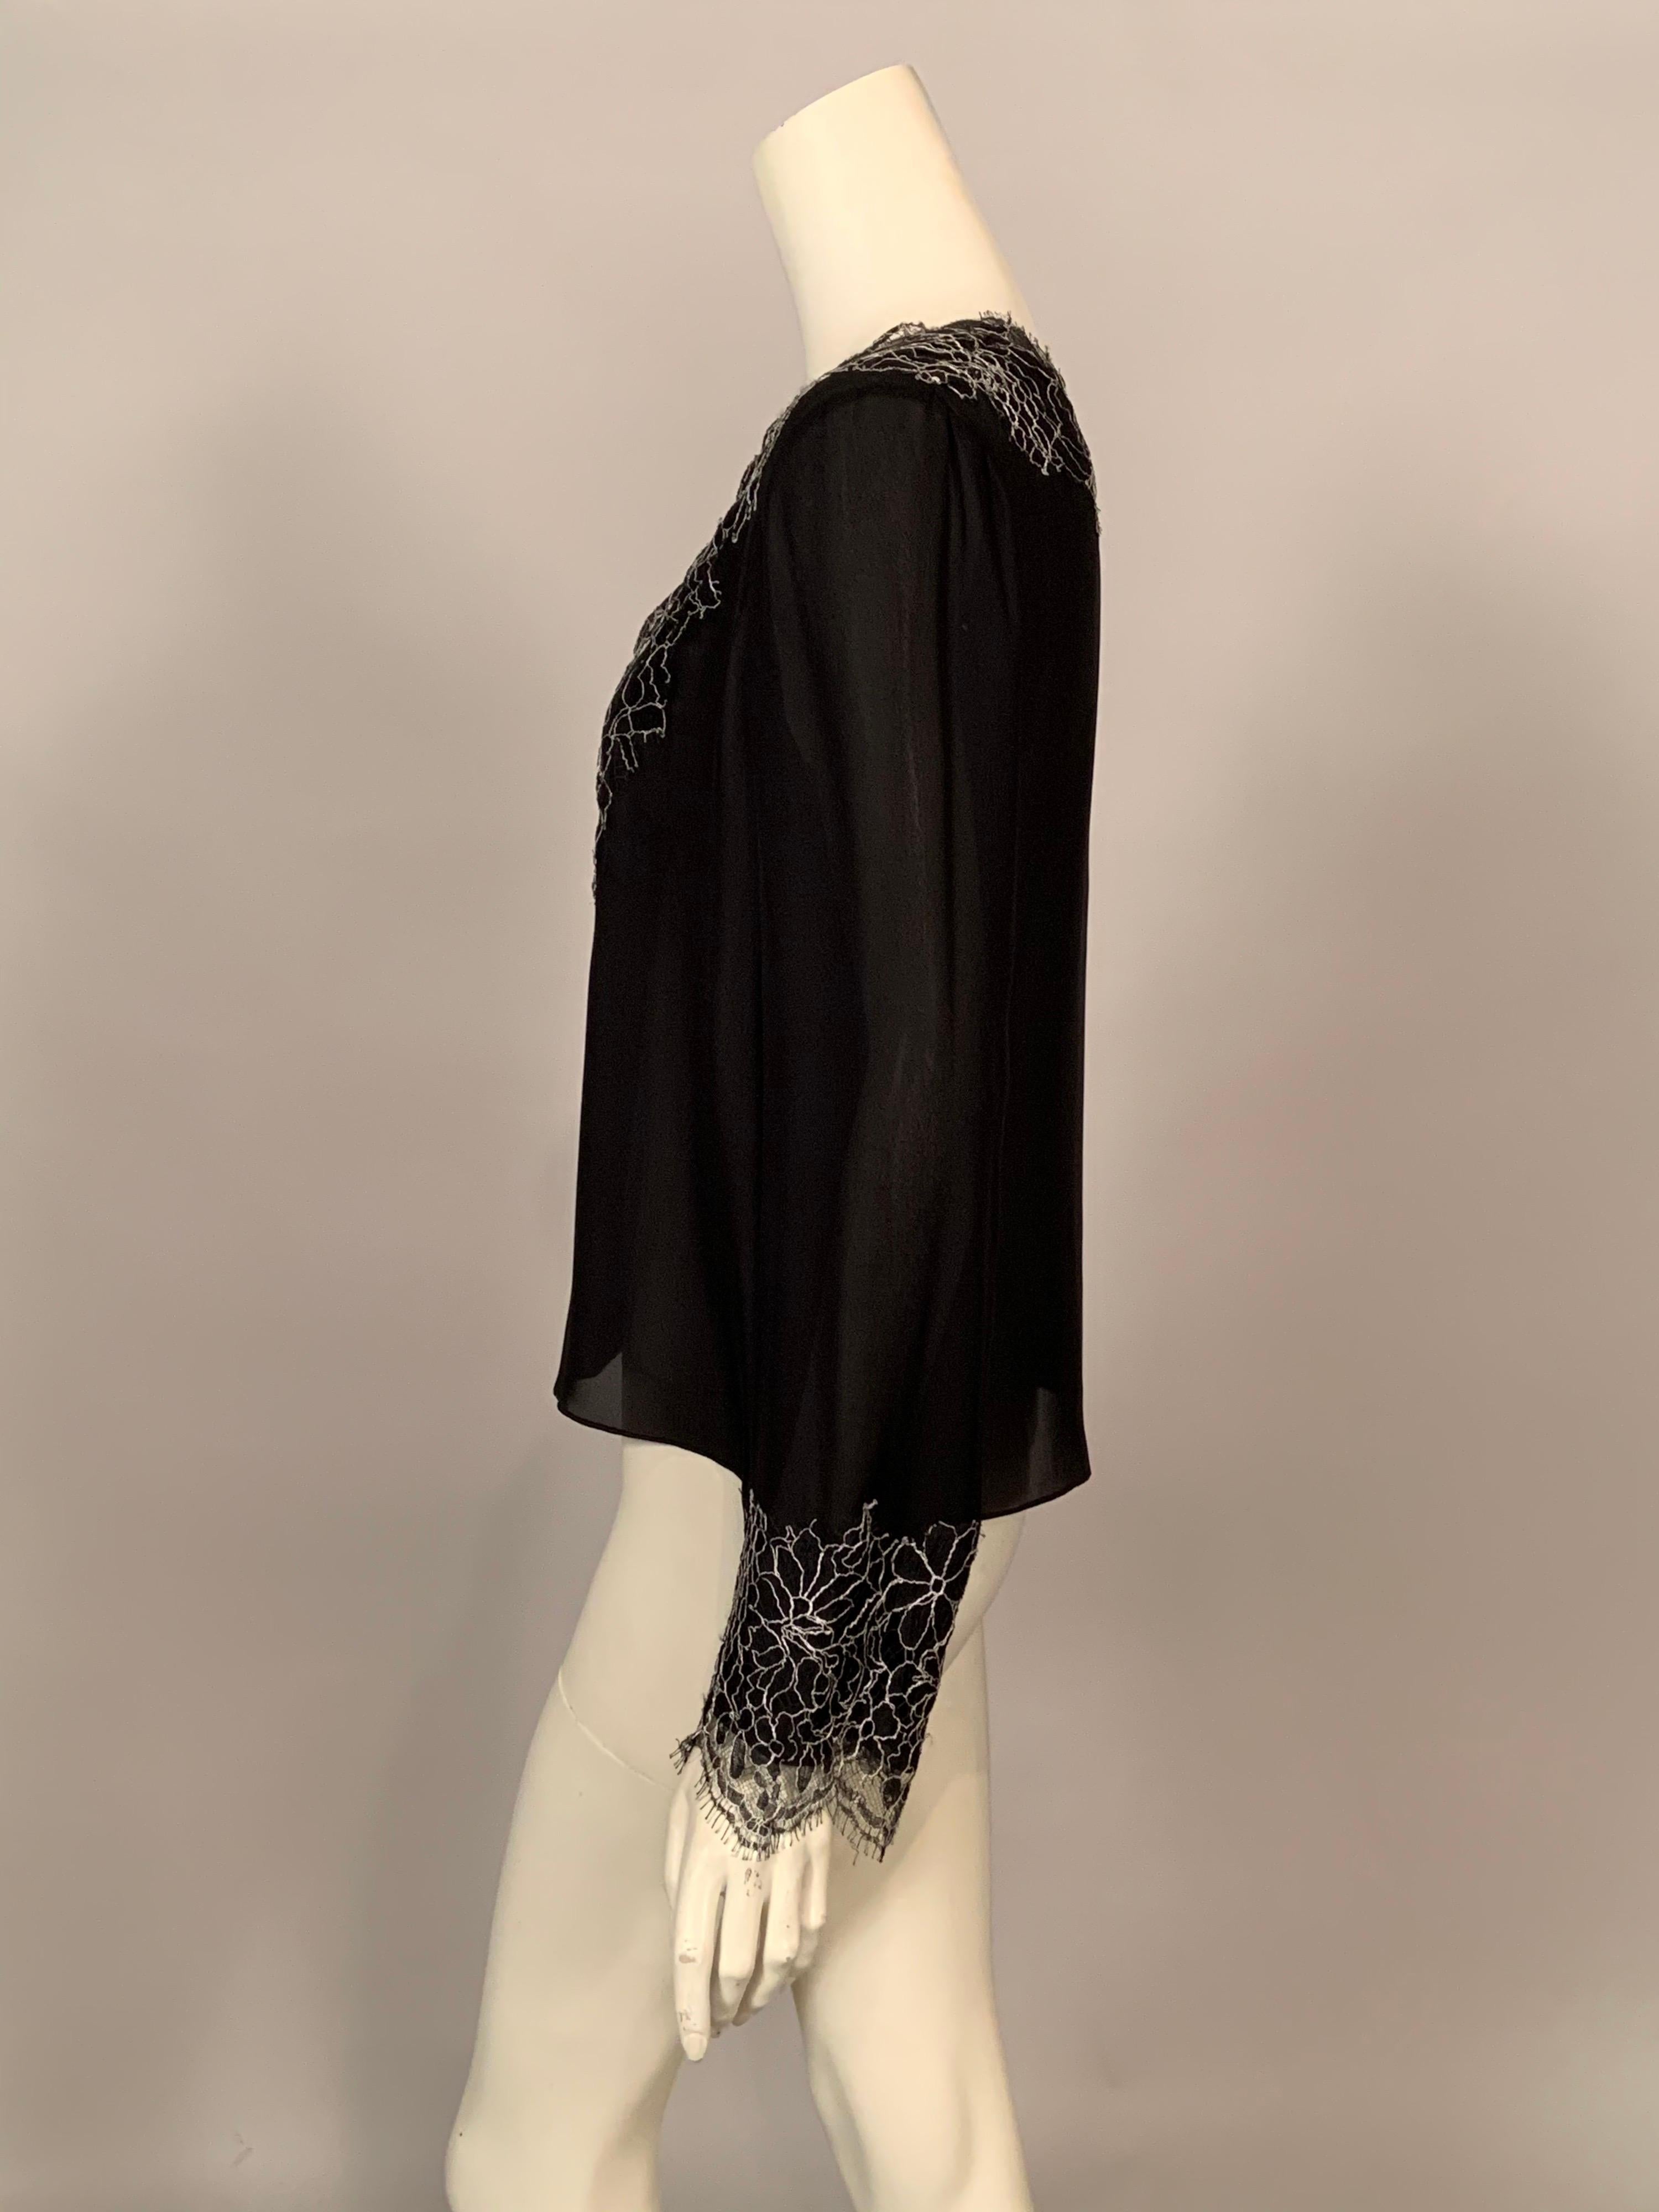 Neiman Marcus Silk Chiffon Blouse Black and White Spider Web Lace Never Worn  In New Condition For Sale In New Hope, PA